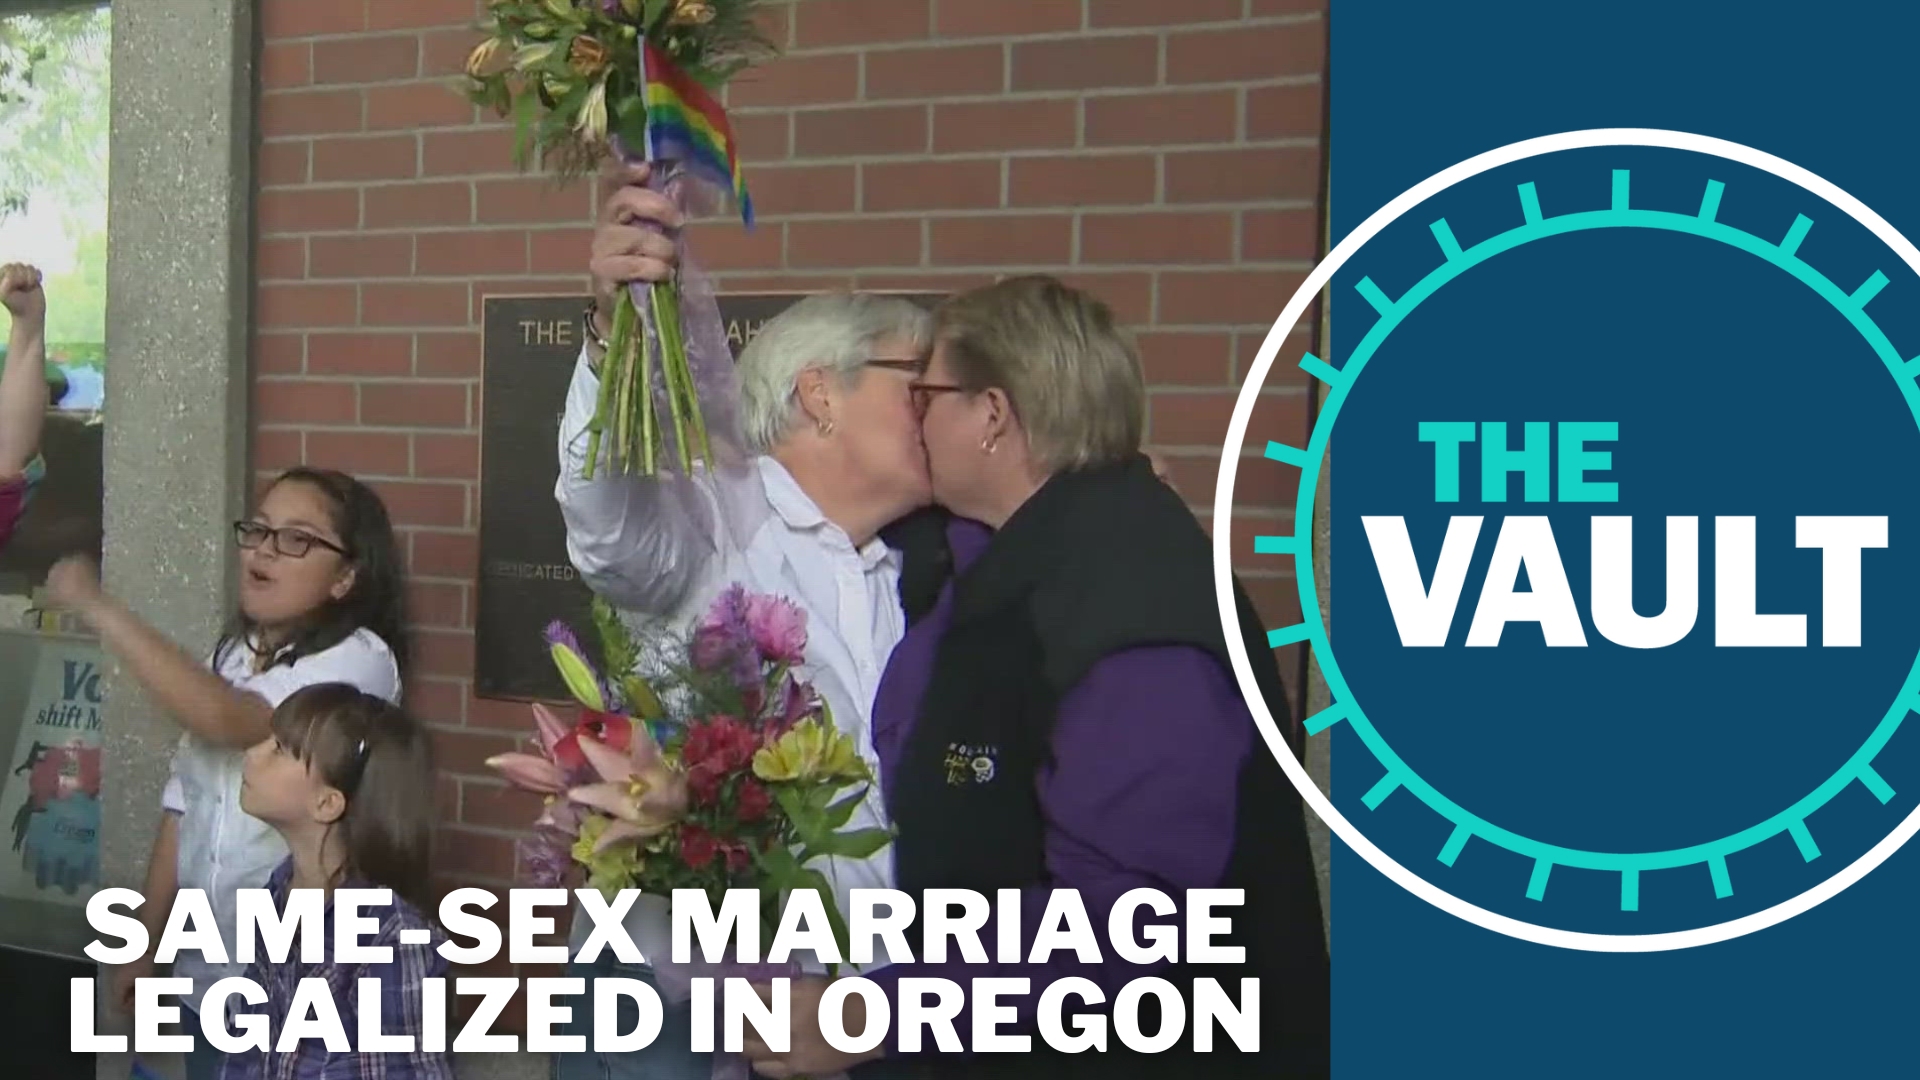 Over the last 20 years, Oregon has gone through several stunning reversals on the issue of same-sex couples' right to marry, all before the Supreme court stepped in.